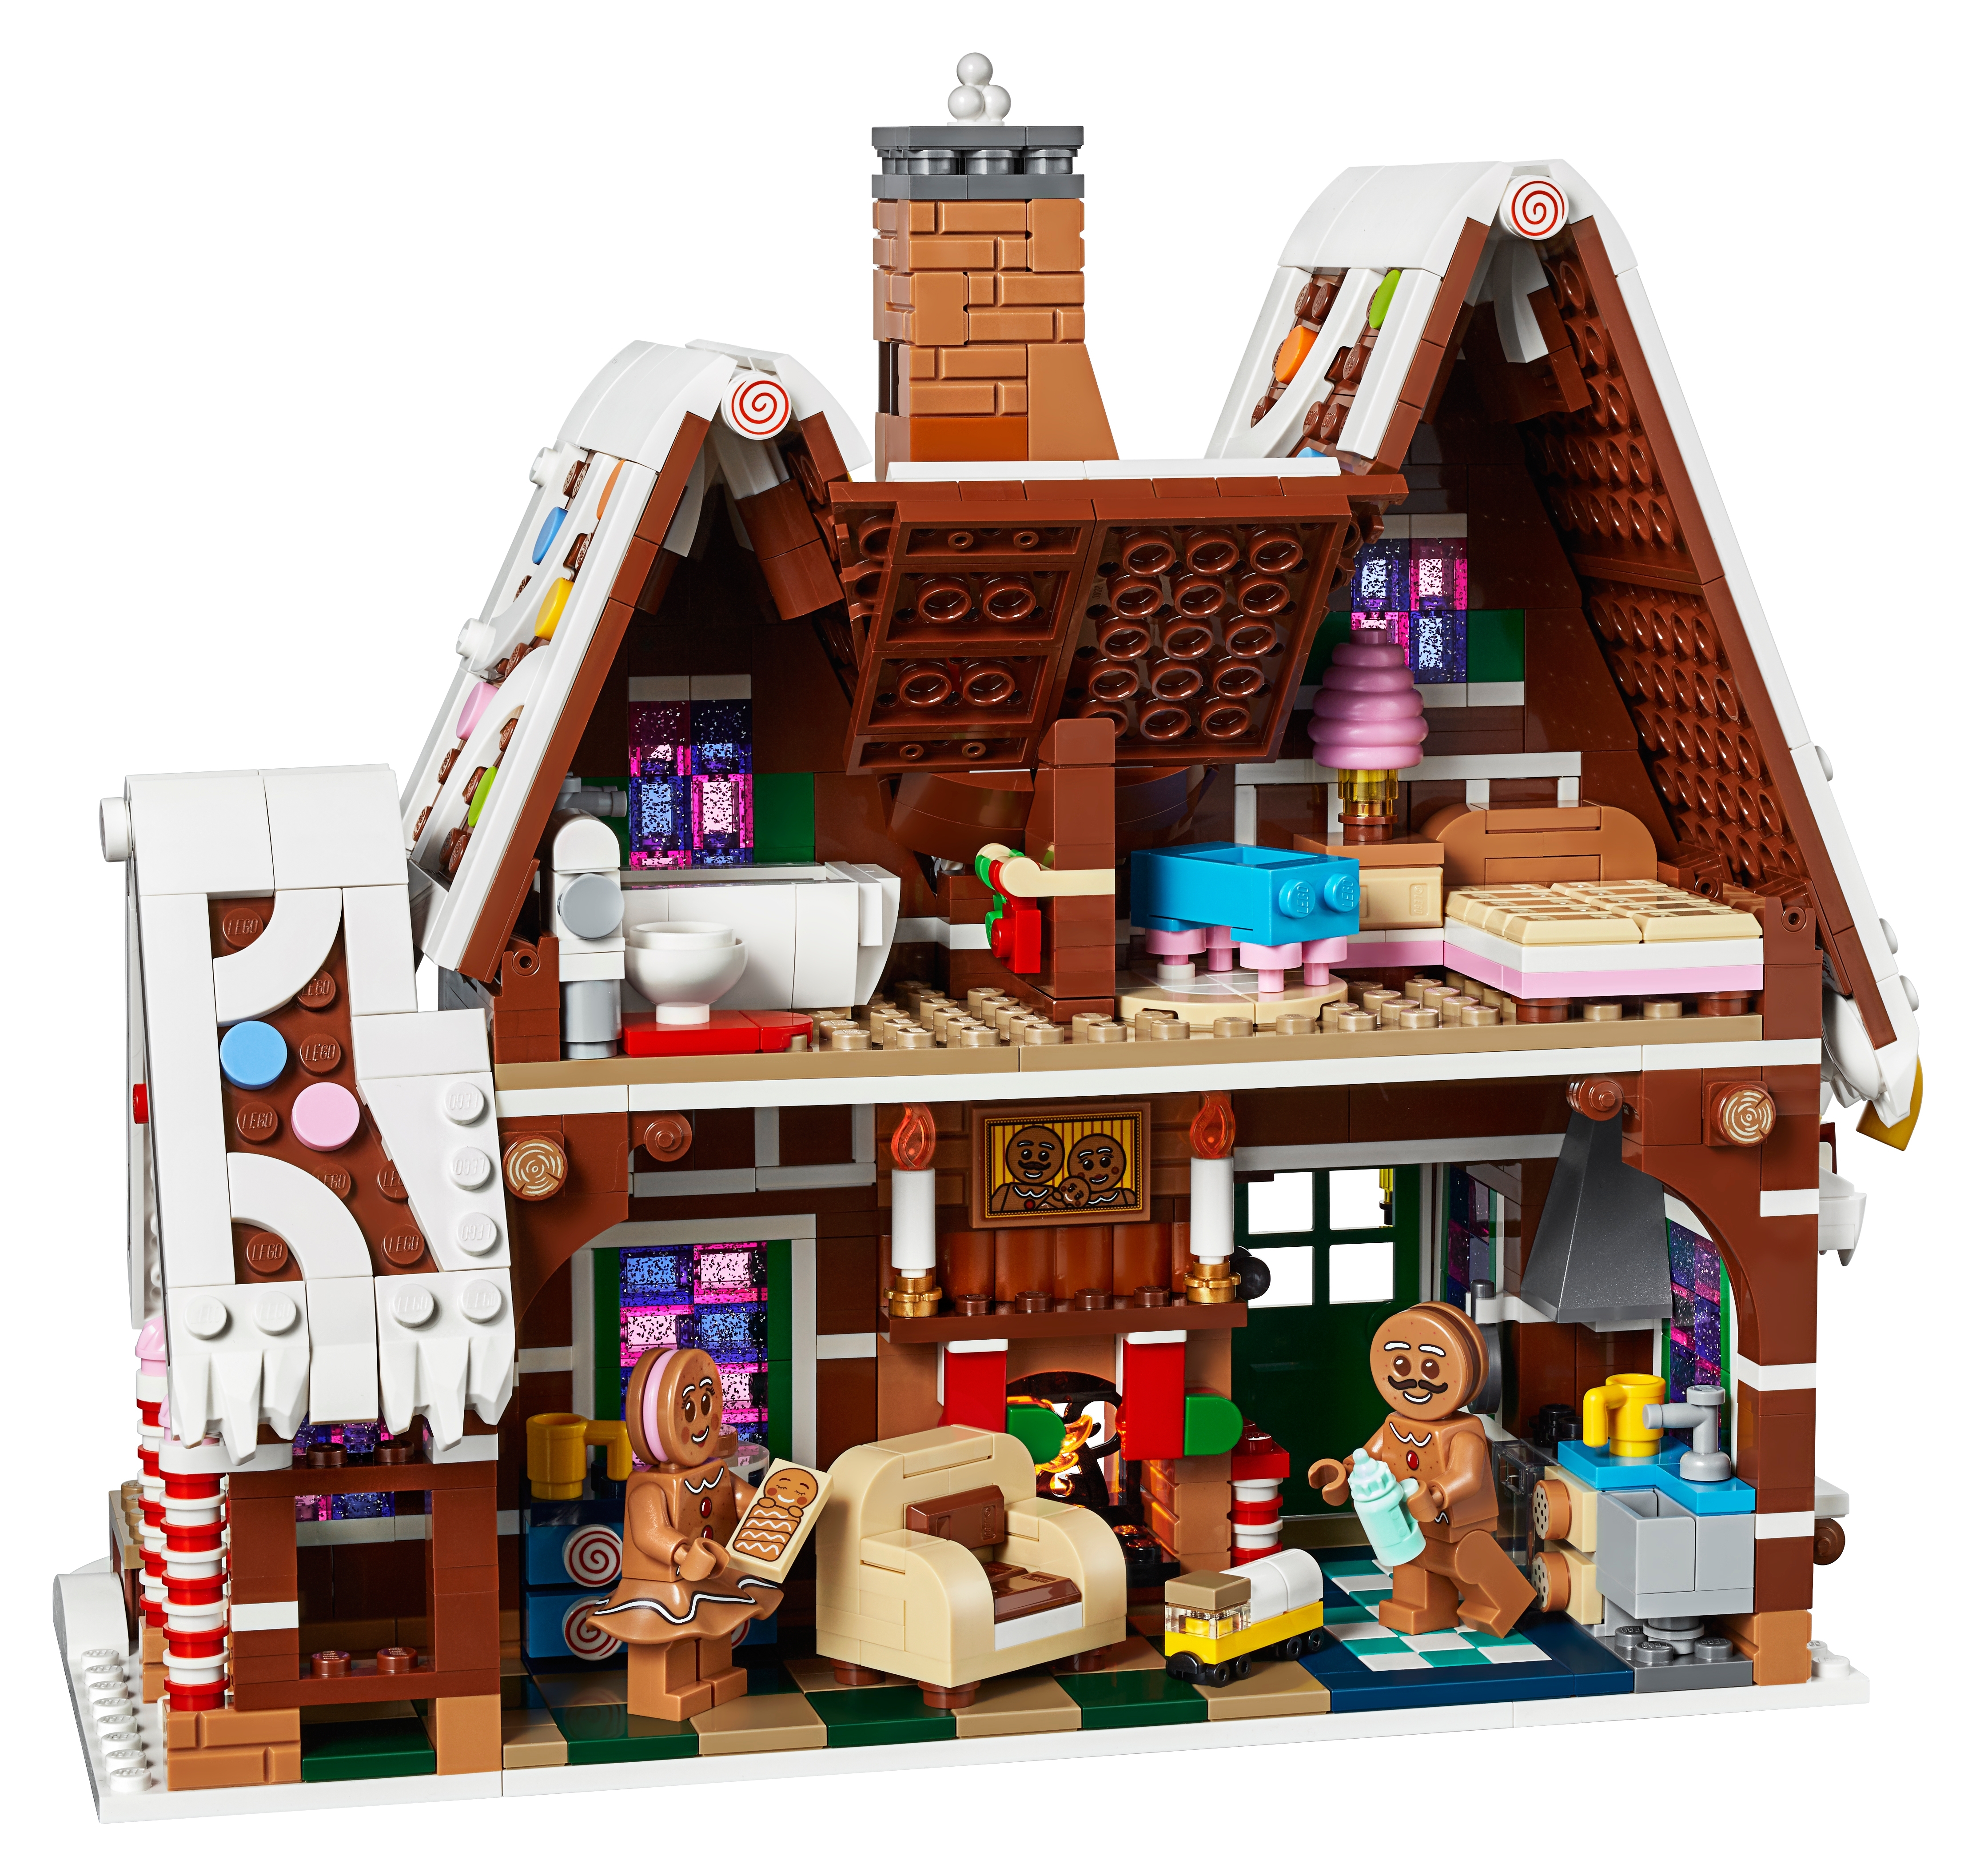 NEW LEGO Gingerbread Woman FROM SET 10267 HOLIDAY & EVENT hol168 